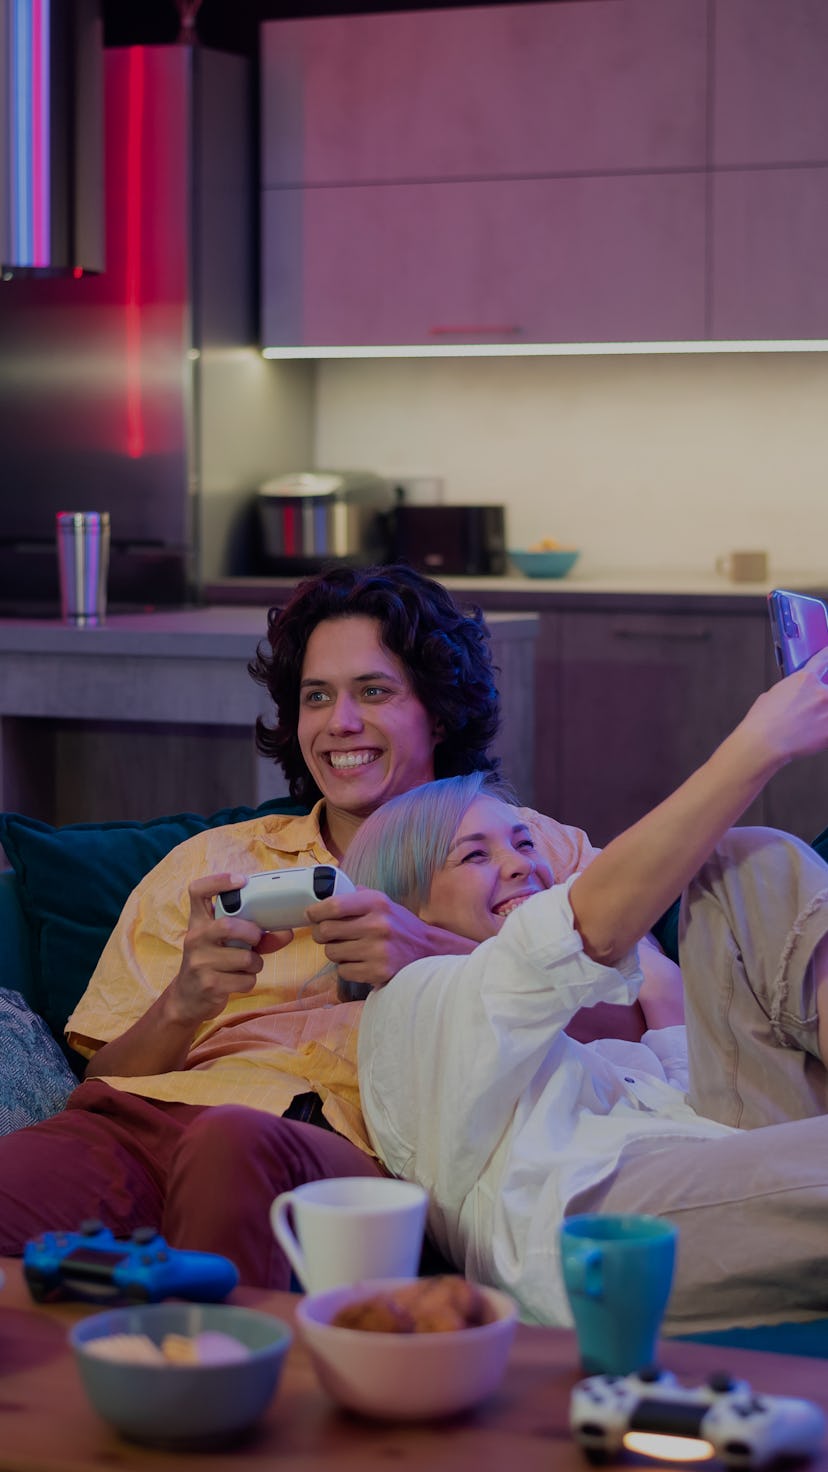 Guy playing video game while girl using smartphone for social media. Spending time together at home.